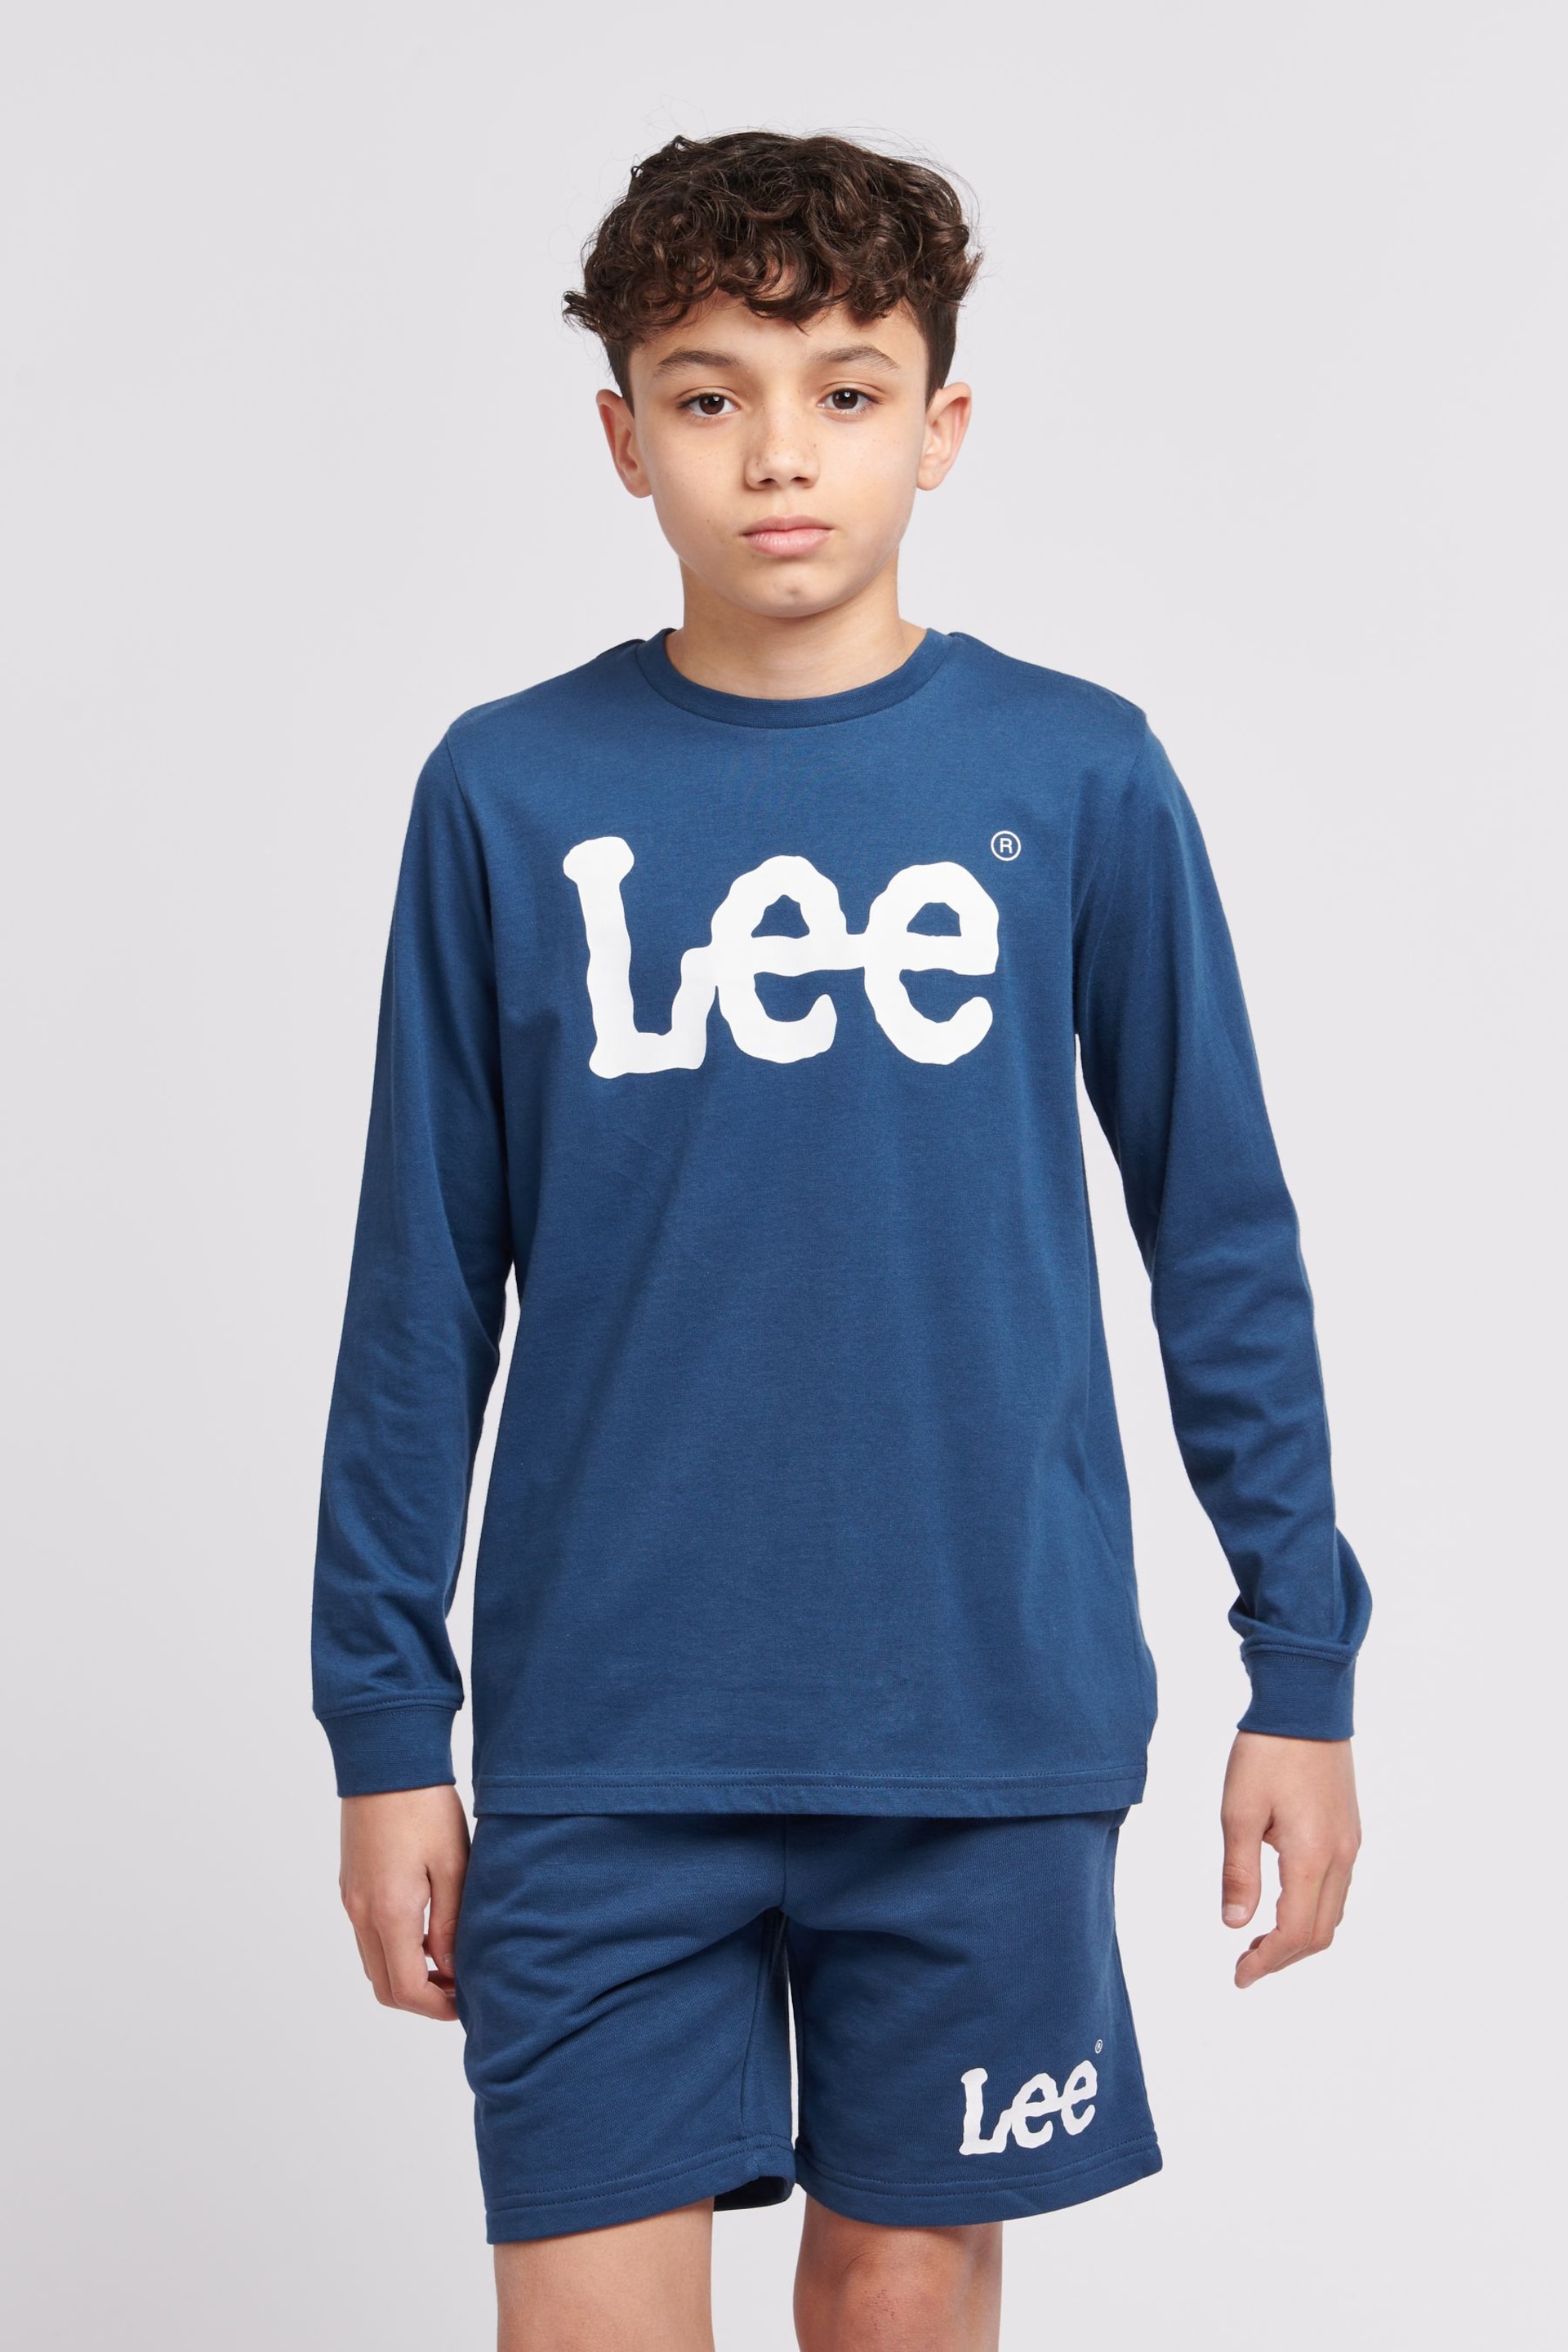 Lee Boys Wobbly Graphic Long Sleeve T-Shirt - Image 1 of 5